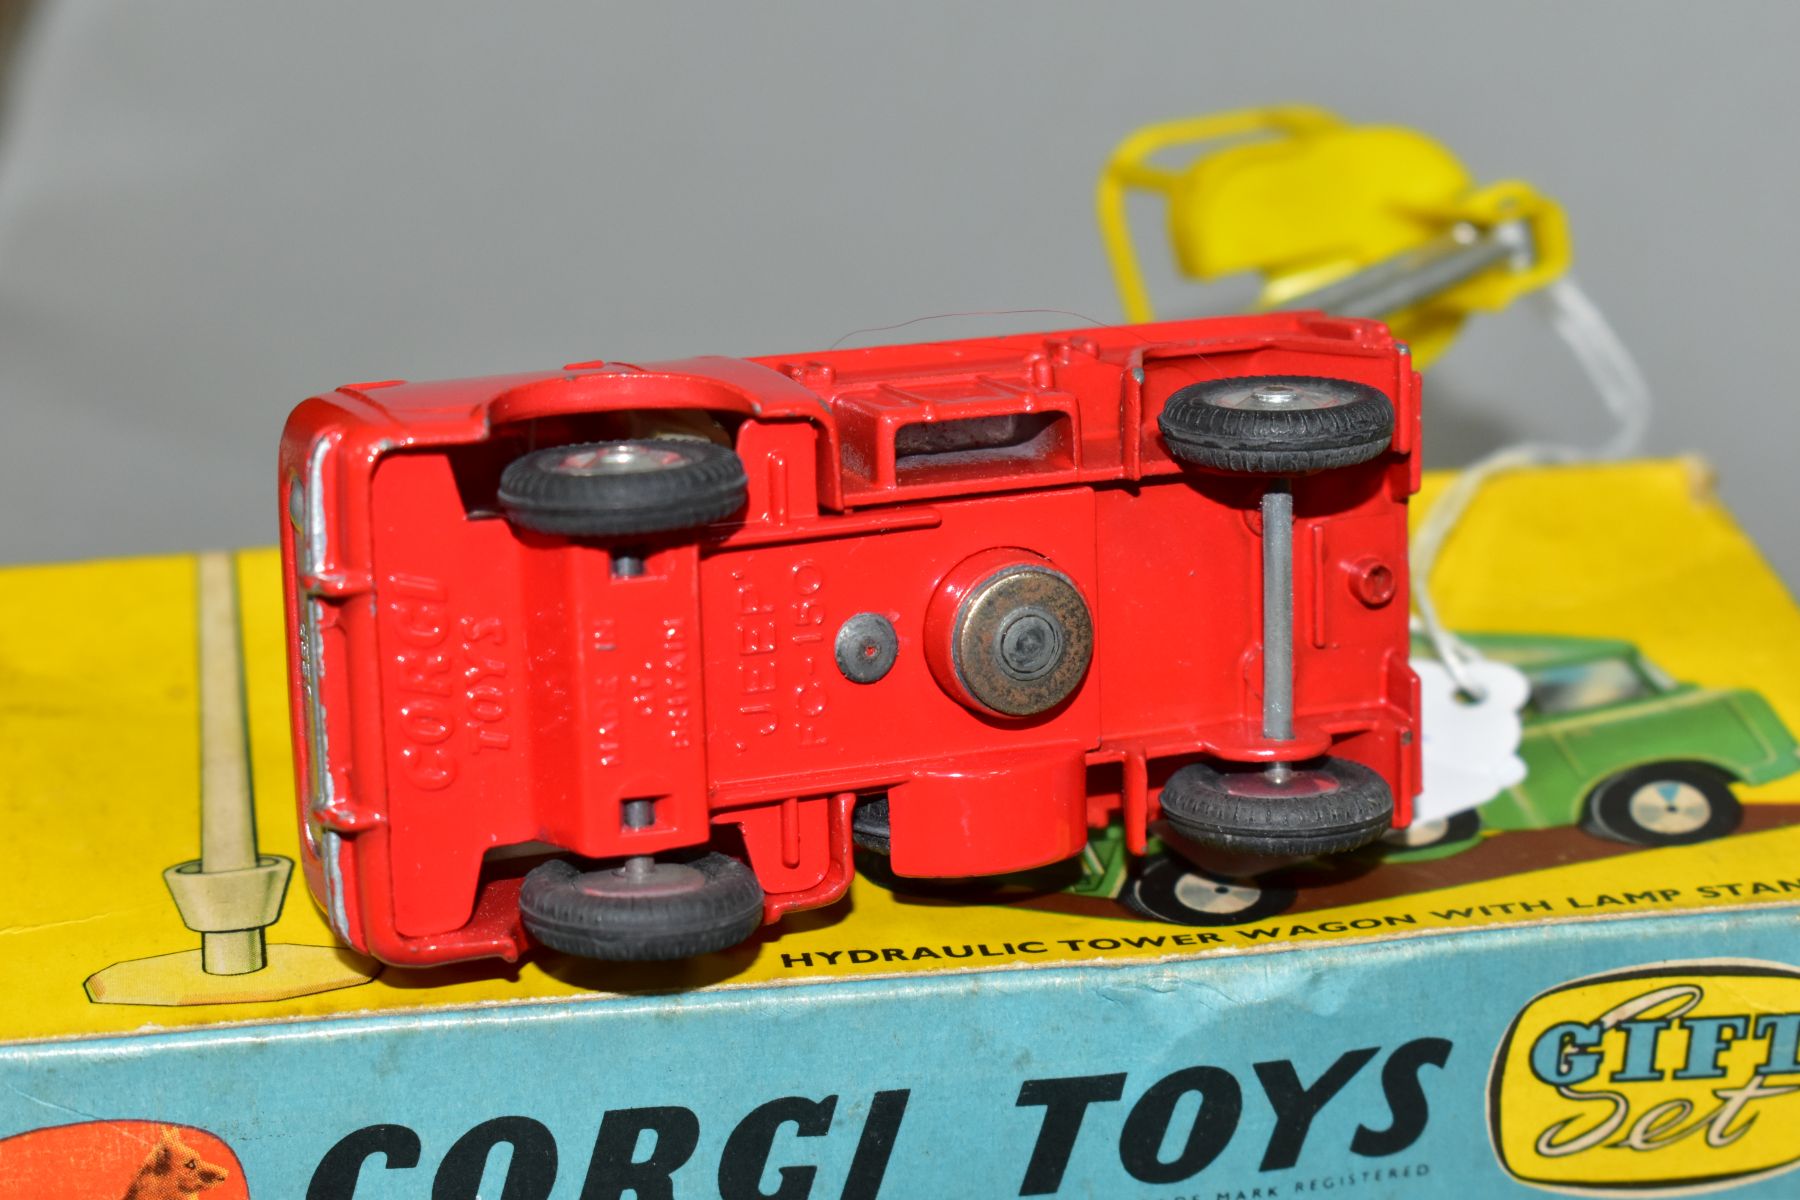 A BOXED CORGI TOYS GIFT SET, No 14, contains FC Jeep Tower Wagon, No 409 but is missing lamp - Image 10 of 11